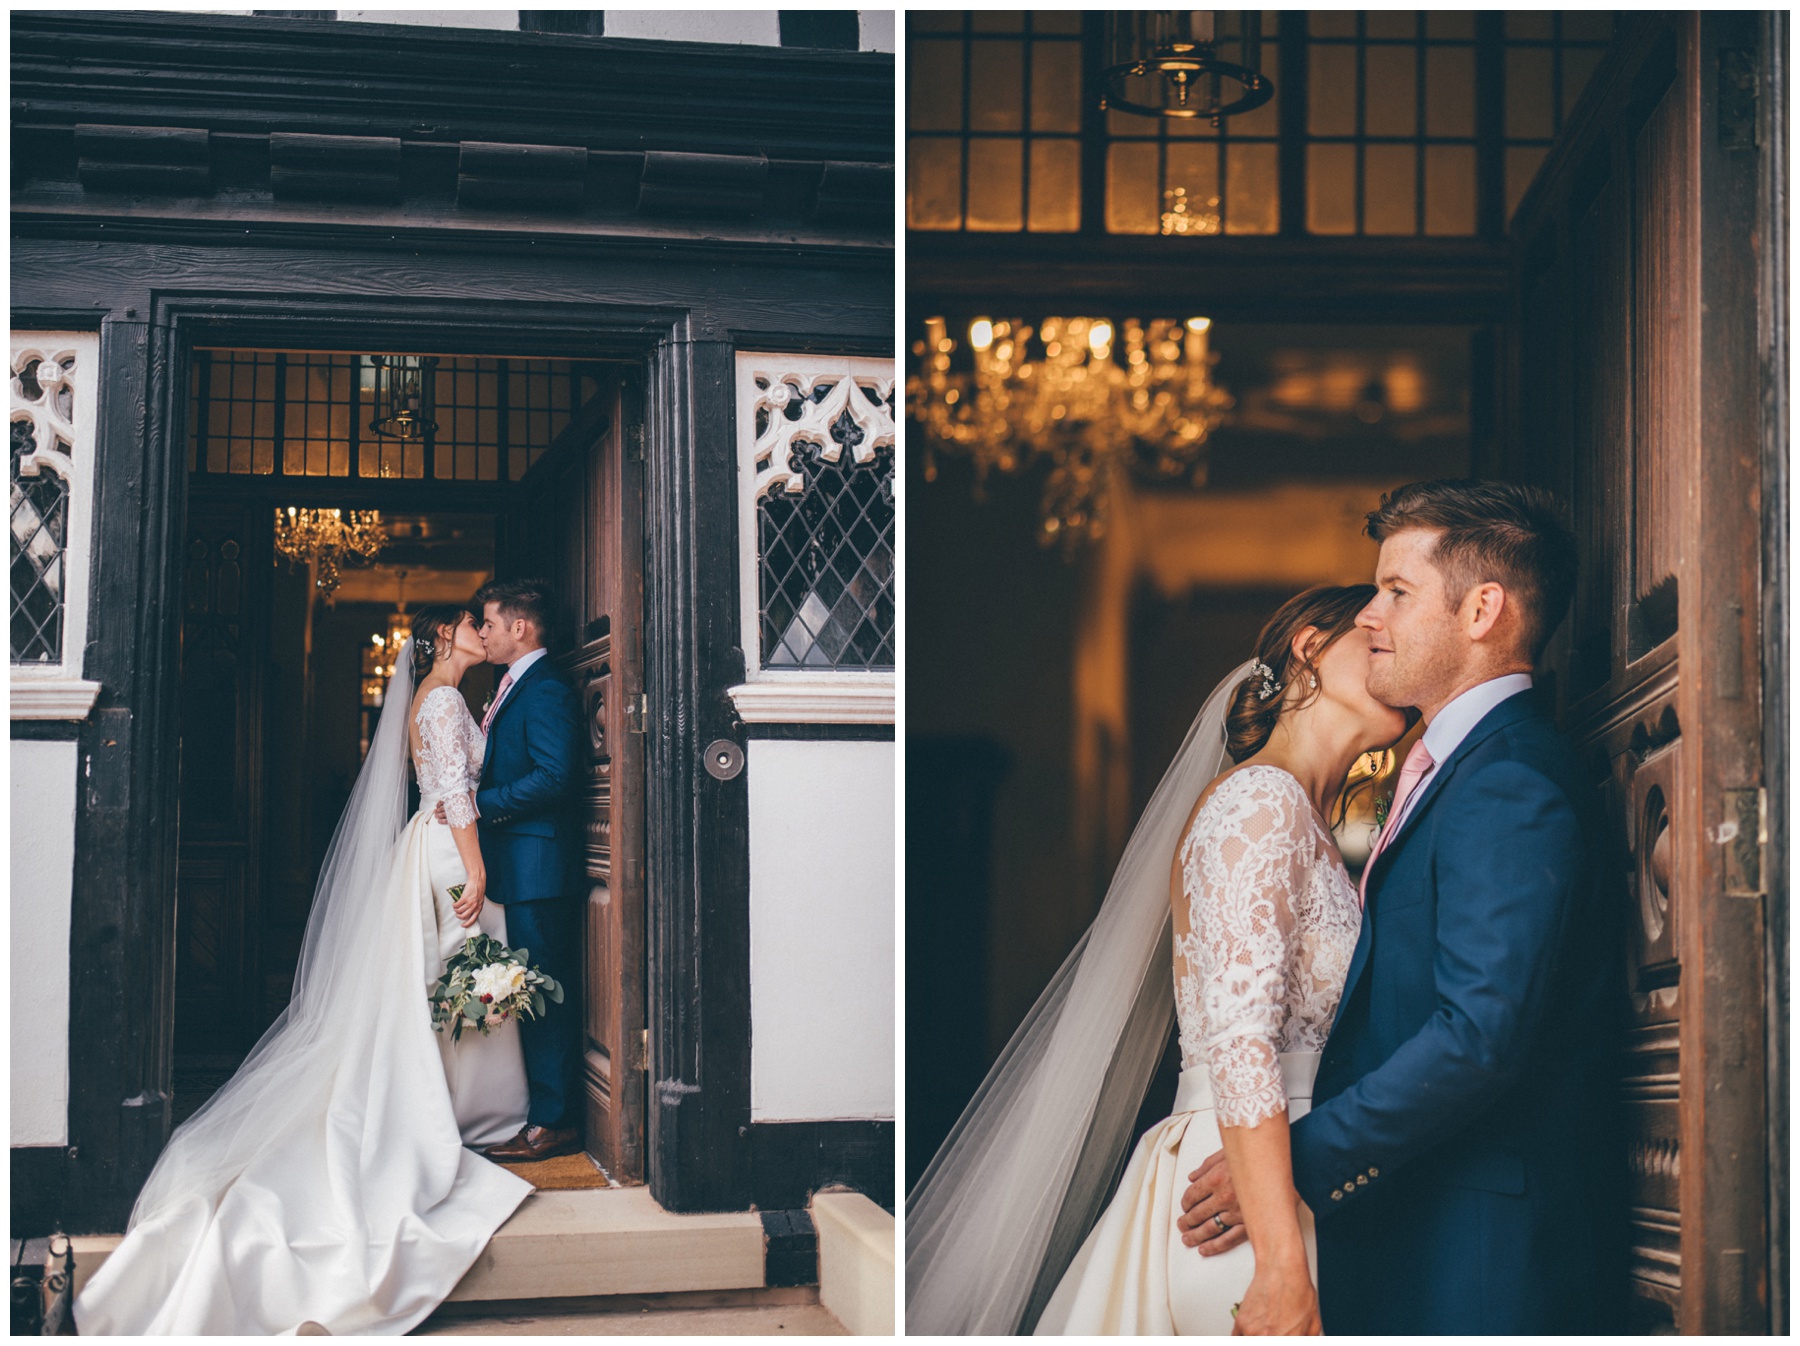 Bride and Groom have their wedding photographs taken at Tilstone House in Cheshire.